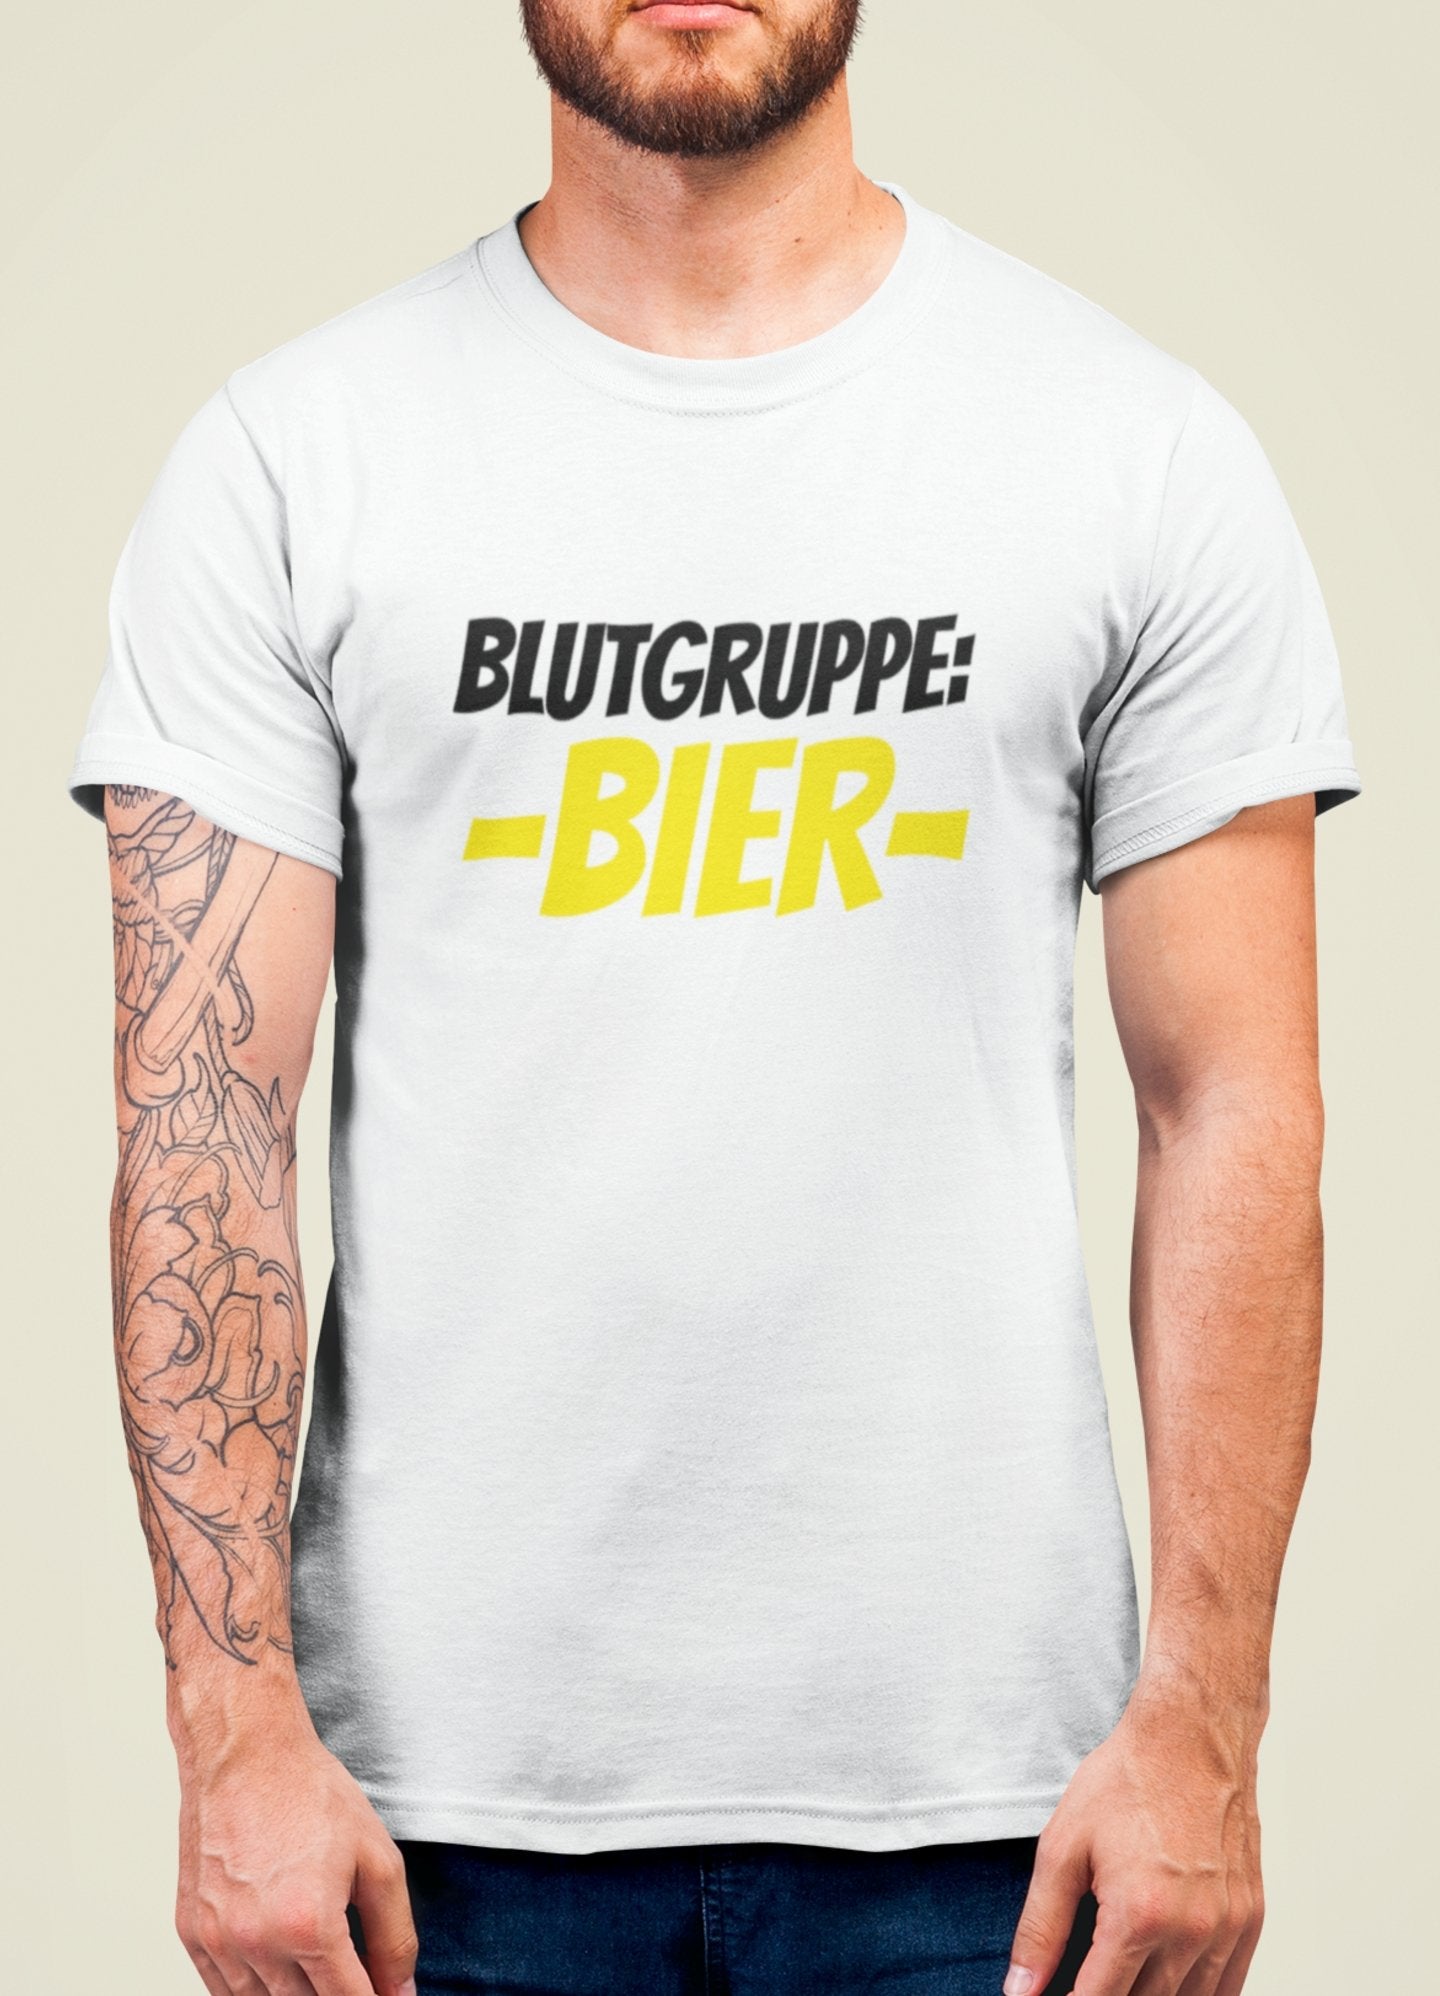 Blutgruppe bier t-shirt lustige shirts funny shirts weisses party shirt